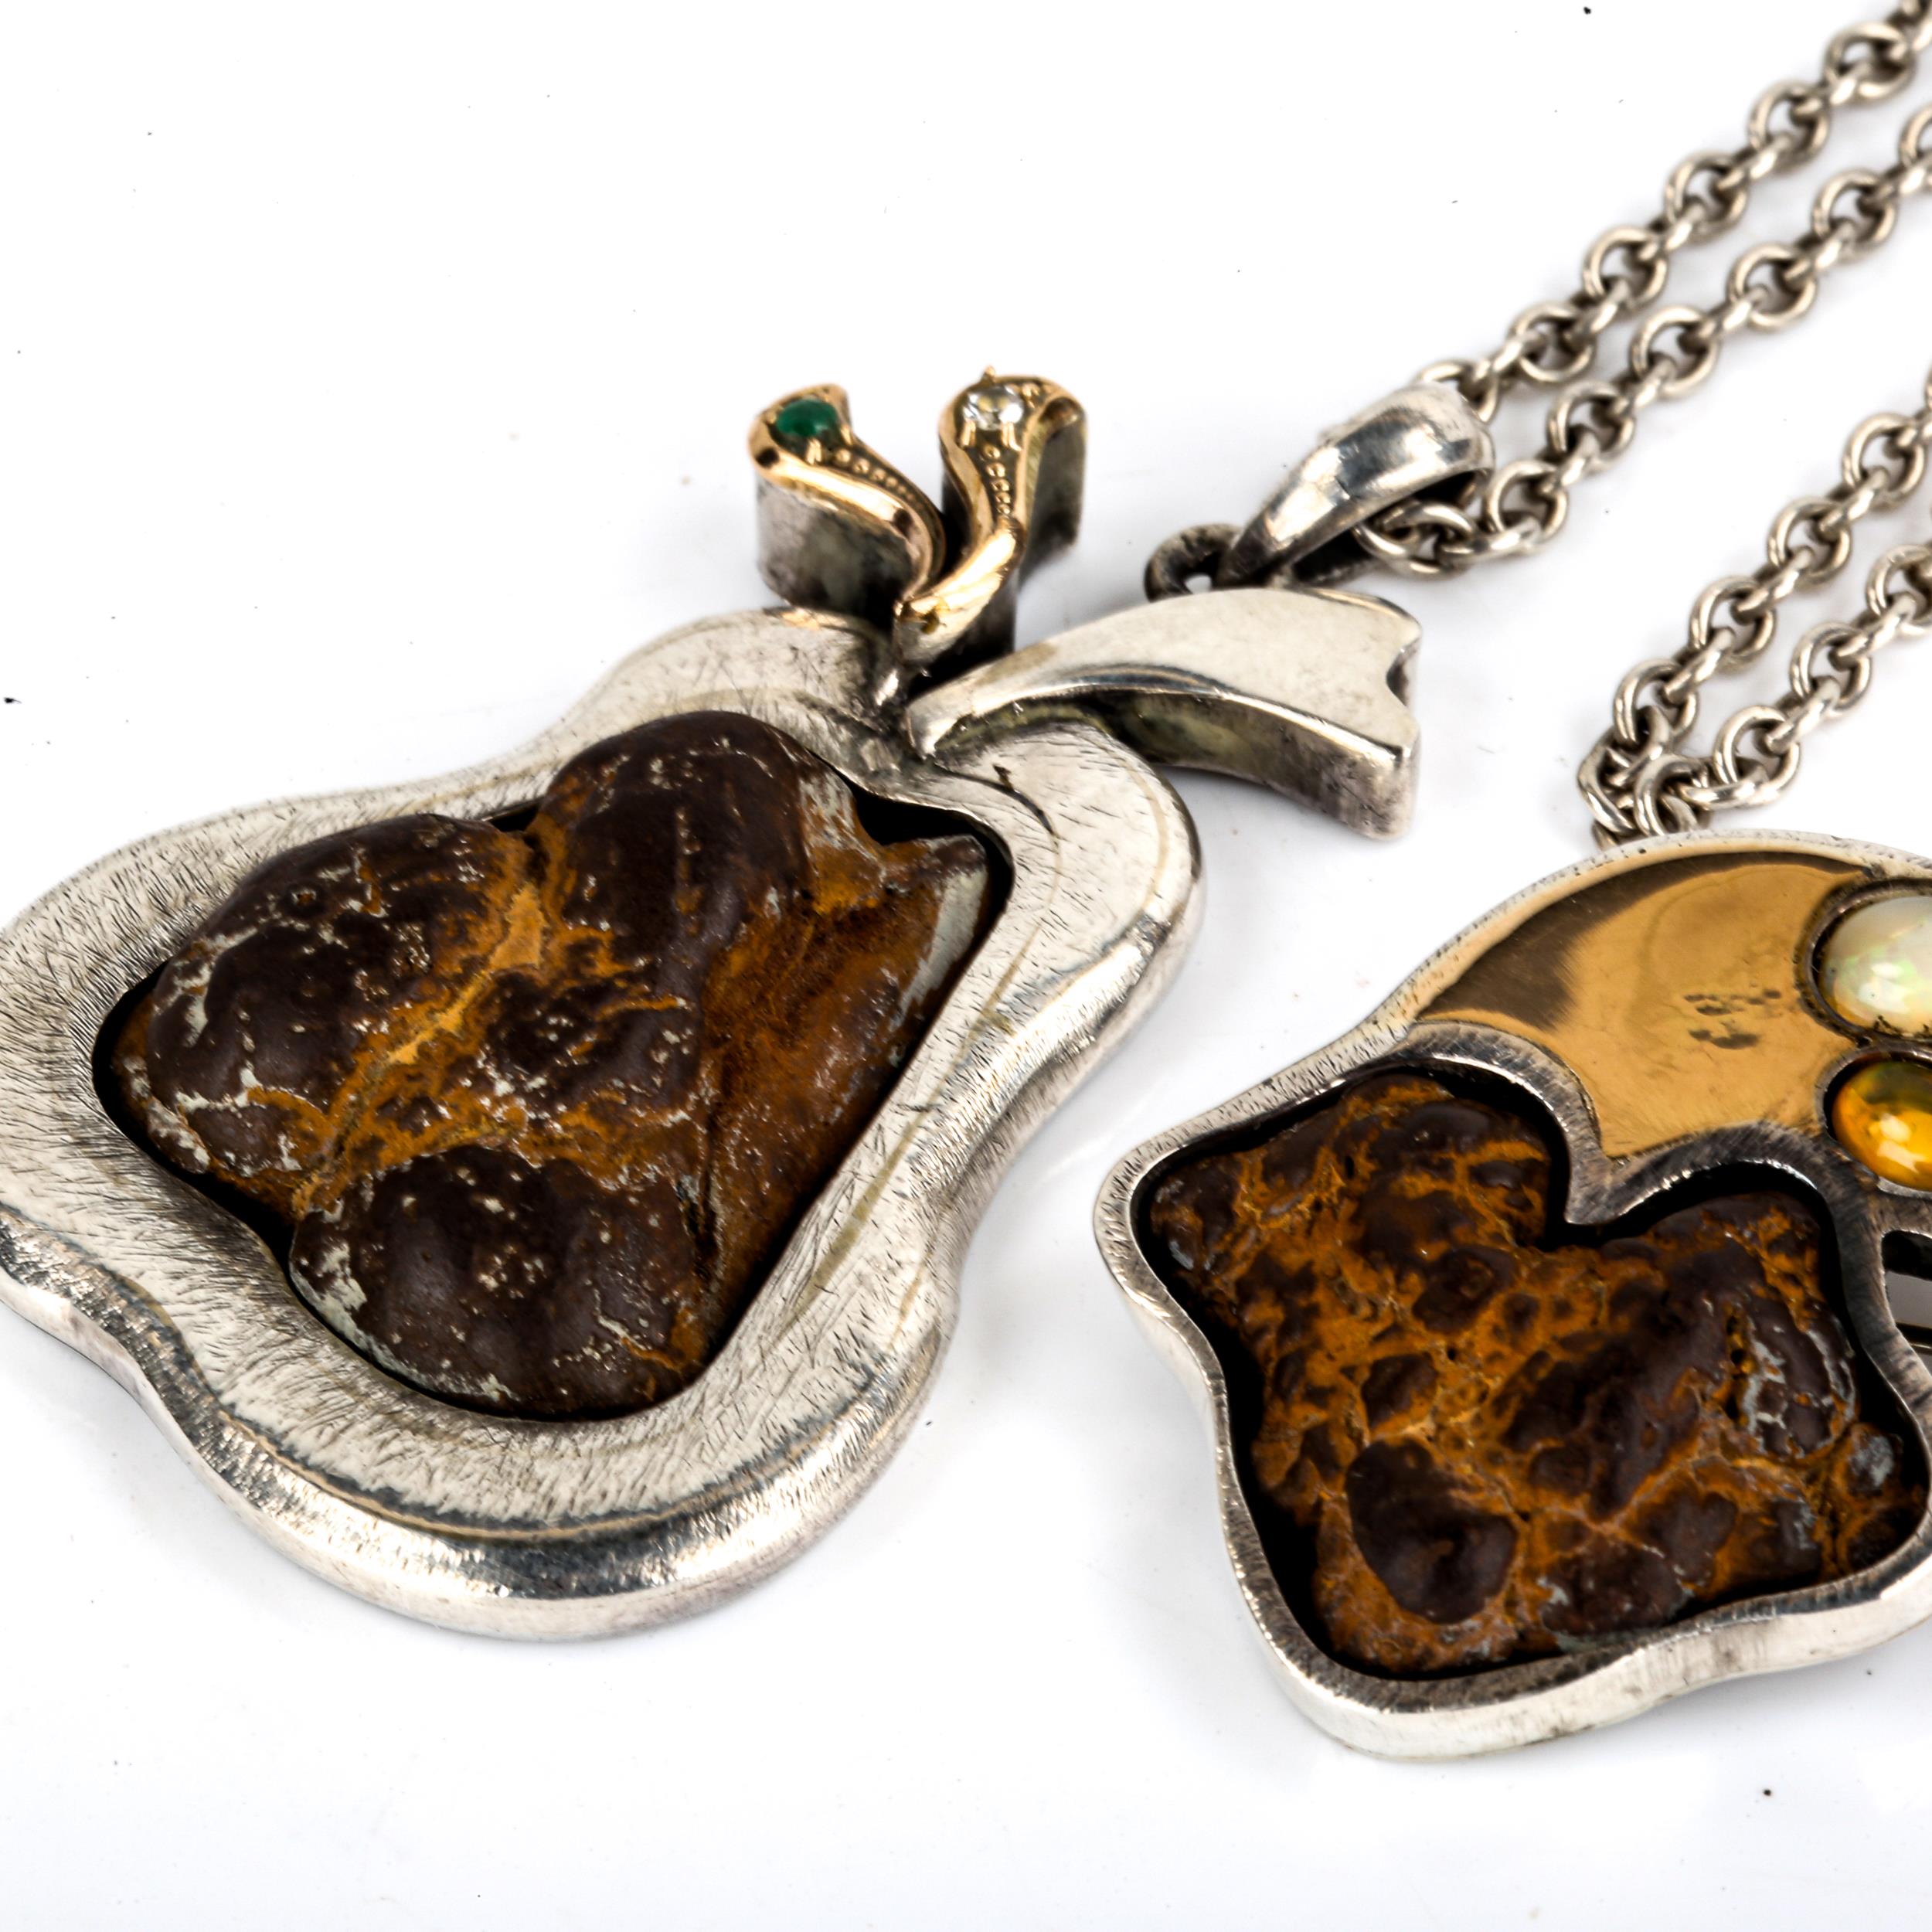 2 pieces of silver-mounted coprolite (fossilised dinosaur faeces) jewellery, comprising pendant - Image 2 of 4